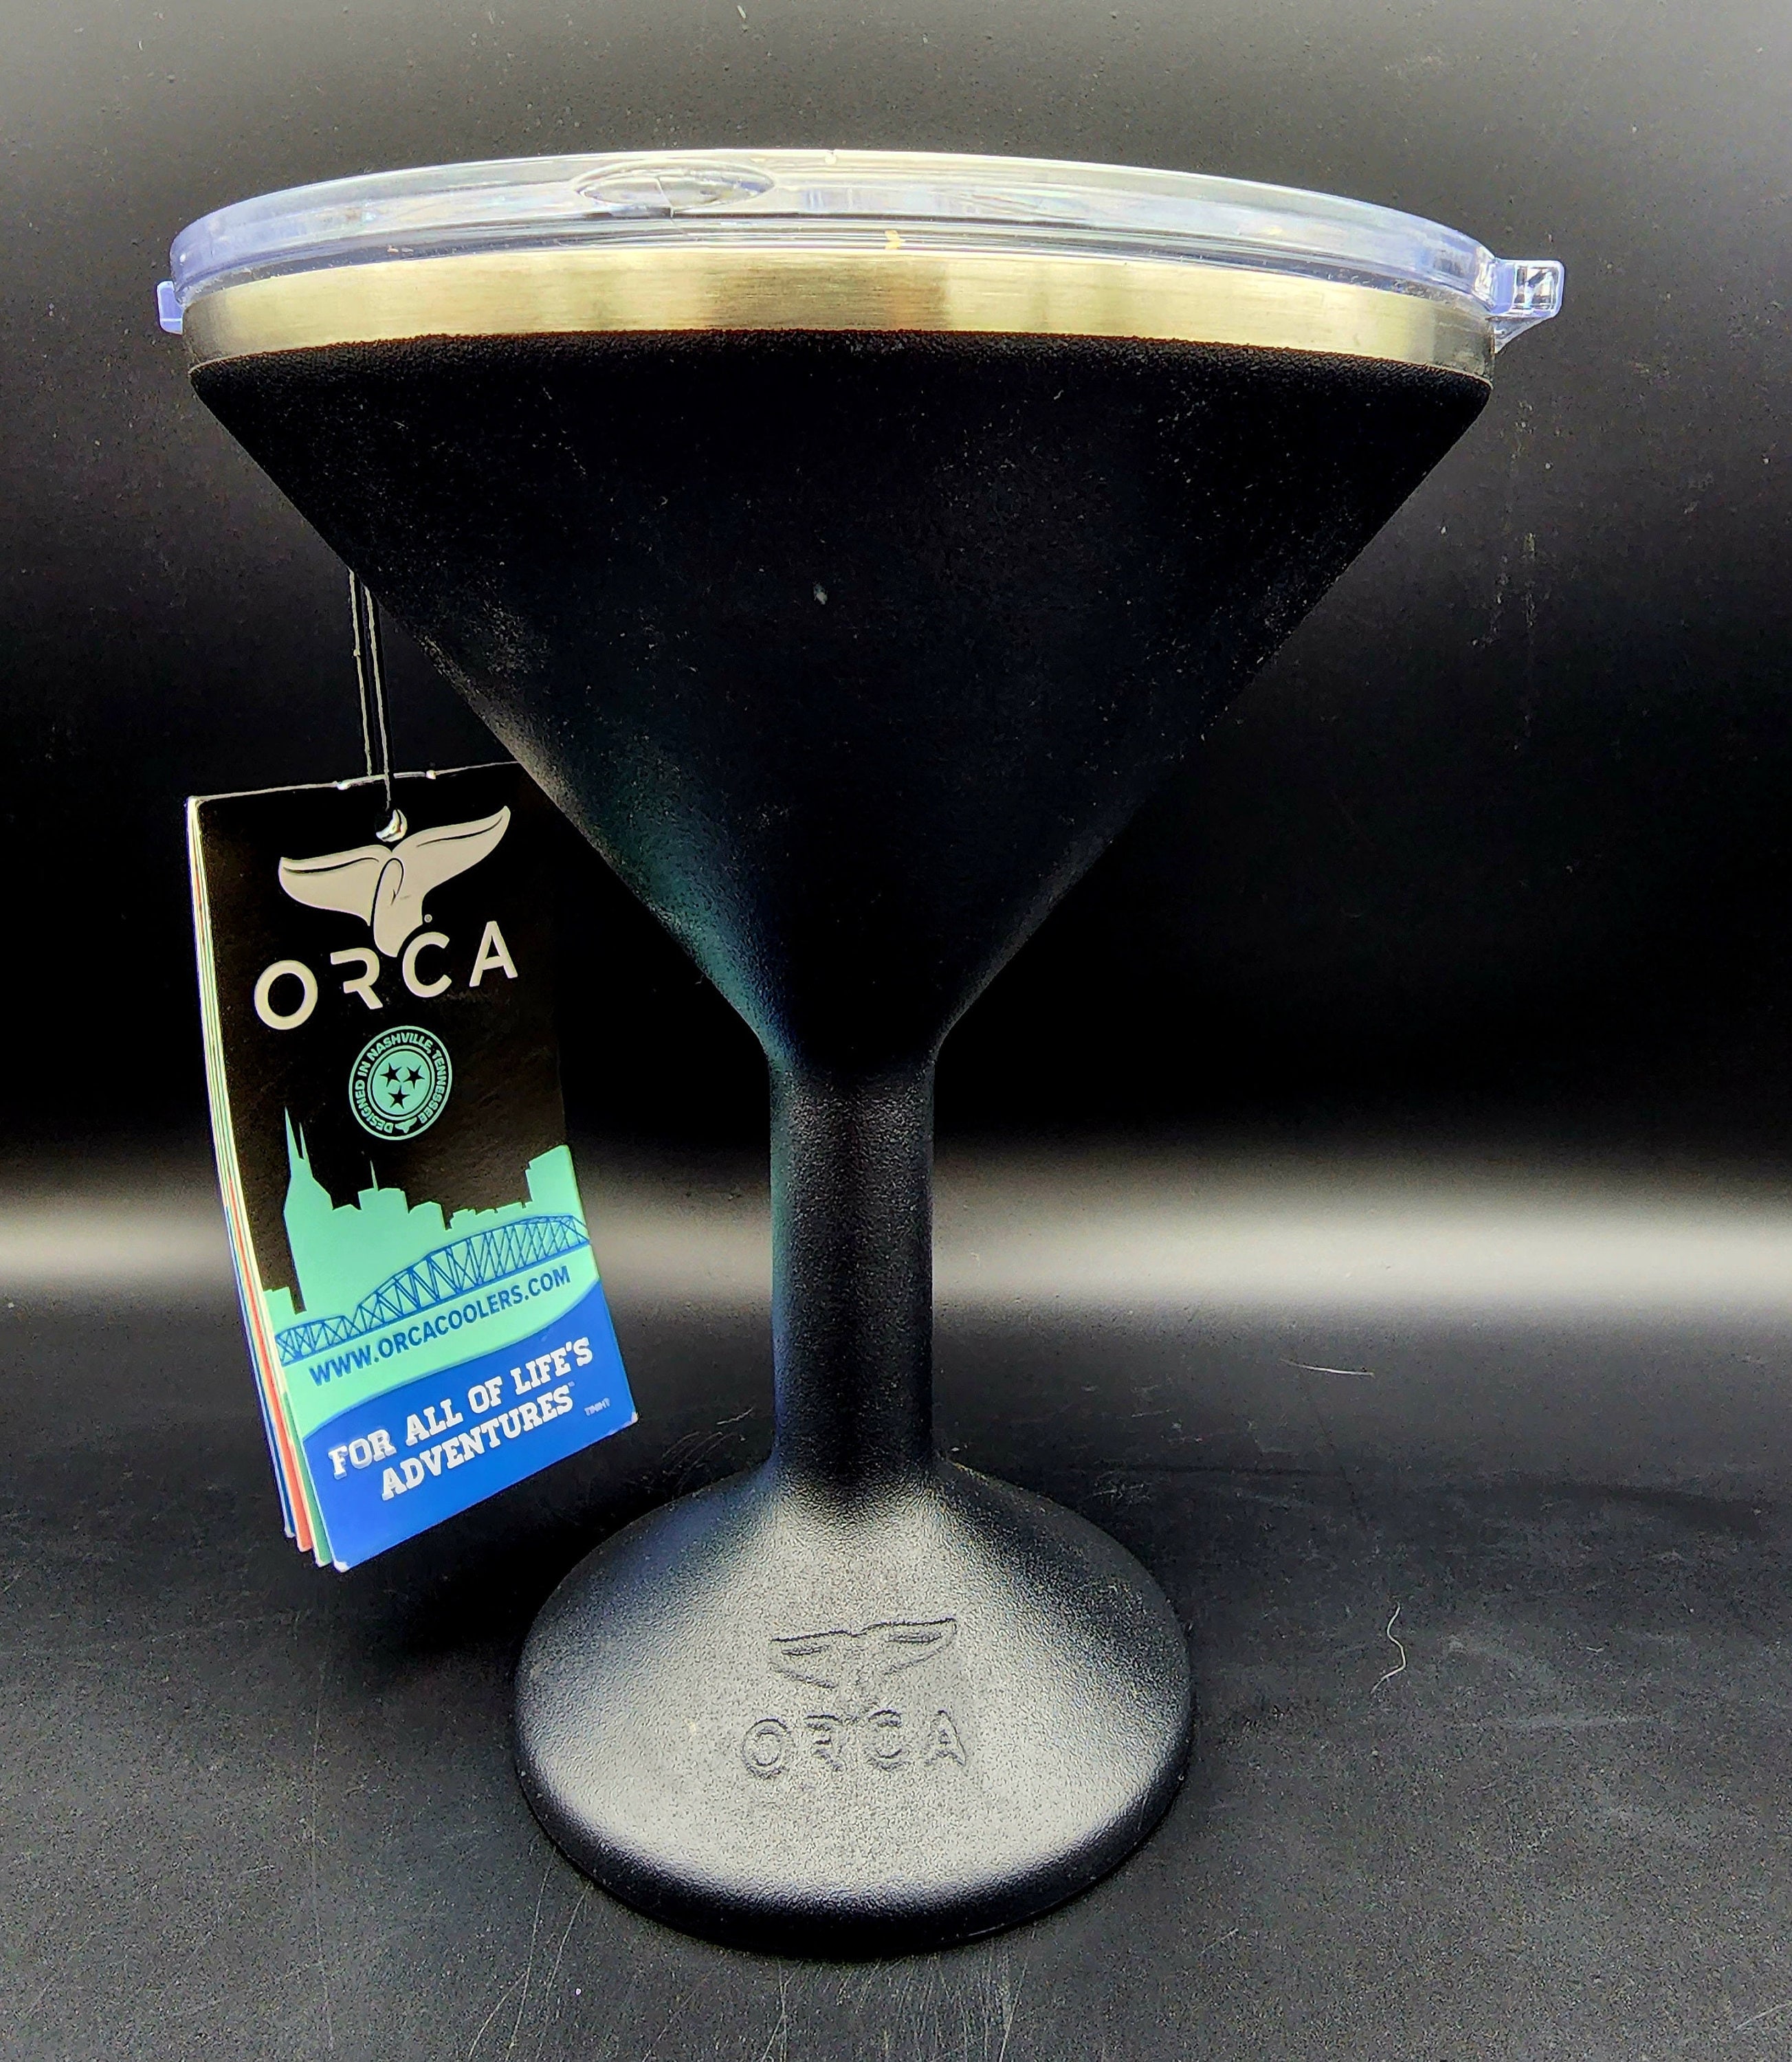 ORCA Chasertini Insulated Martini Style Sipping Cup with Lid - Stainless  Steel for Outdoor, Picnic, …See more ORCA Chasertini Insulated Martini  Style